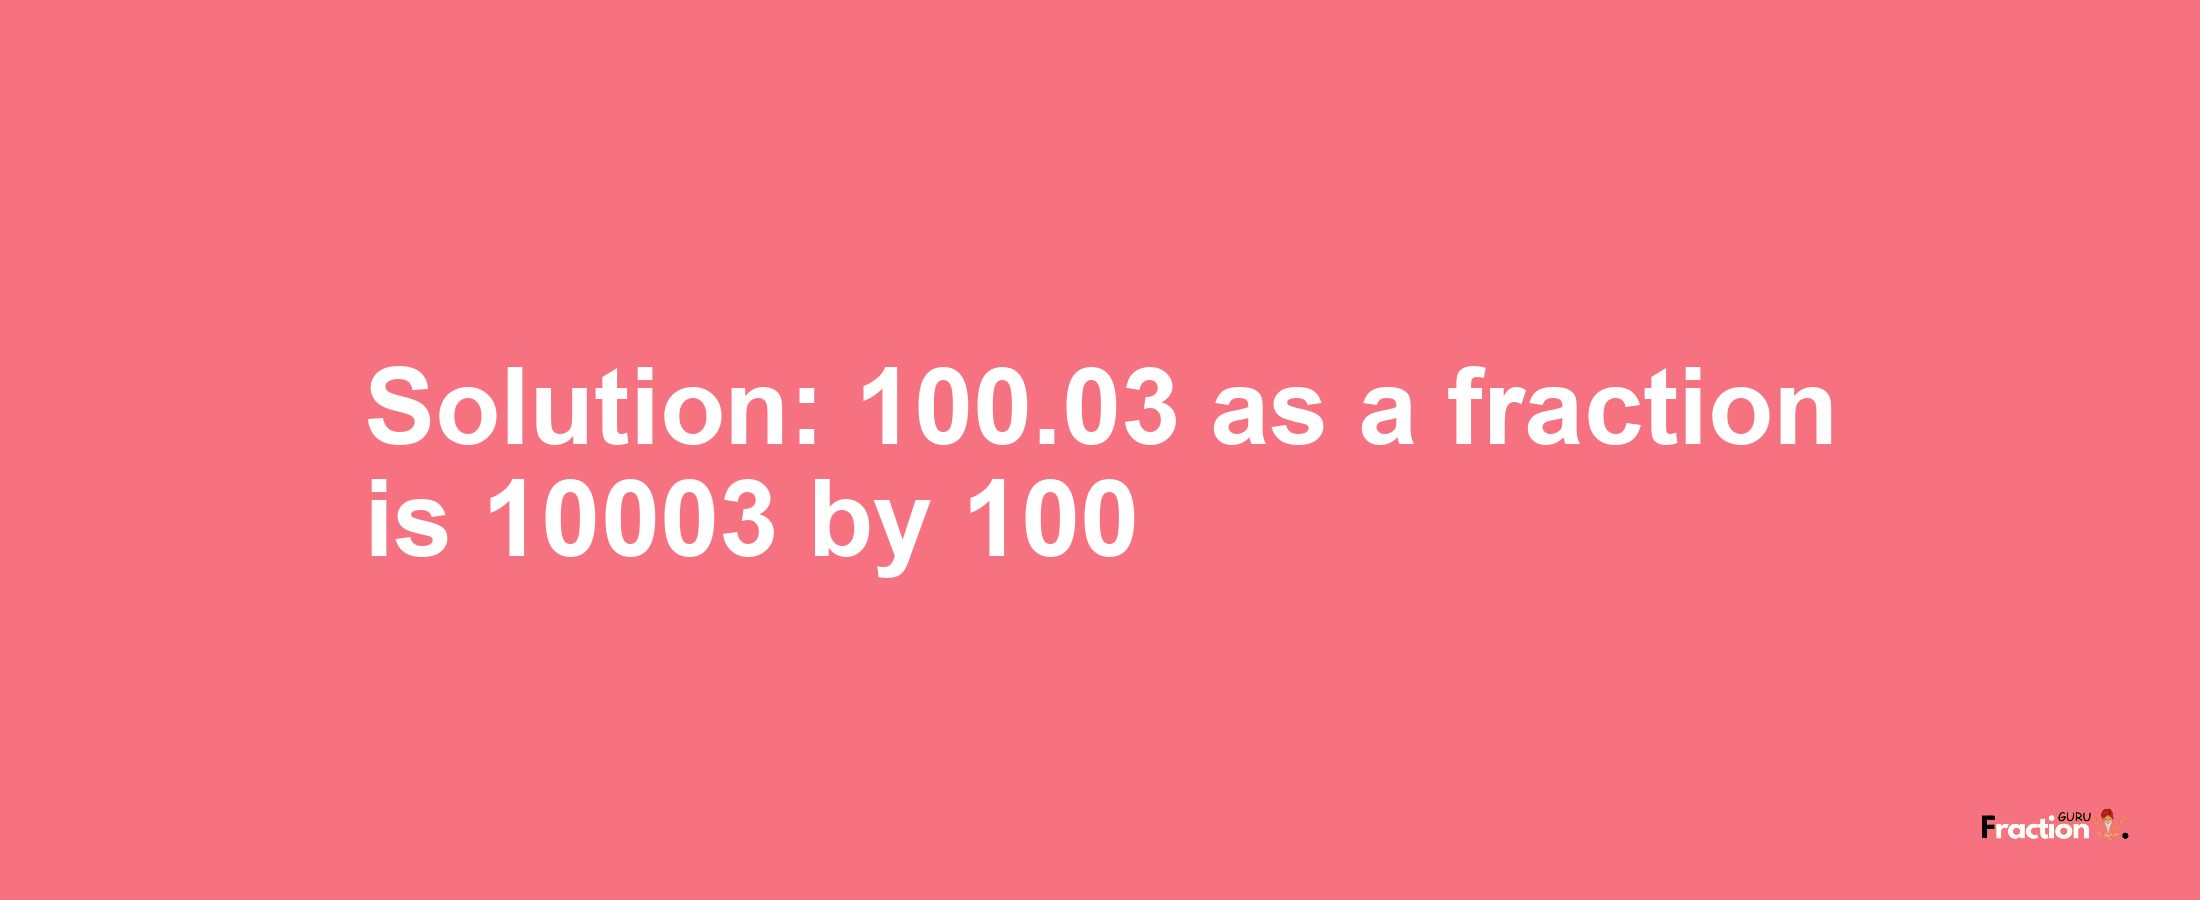 Solution:100.03 as a fraction is 10003/100